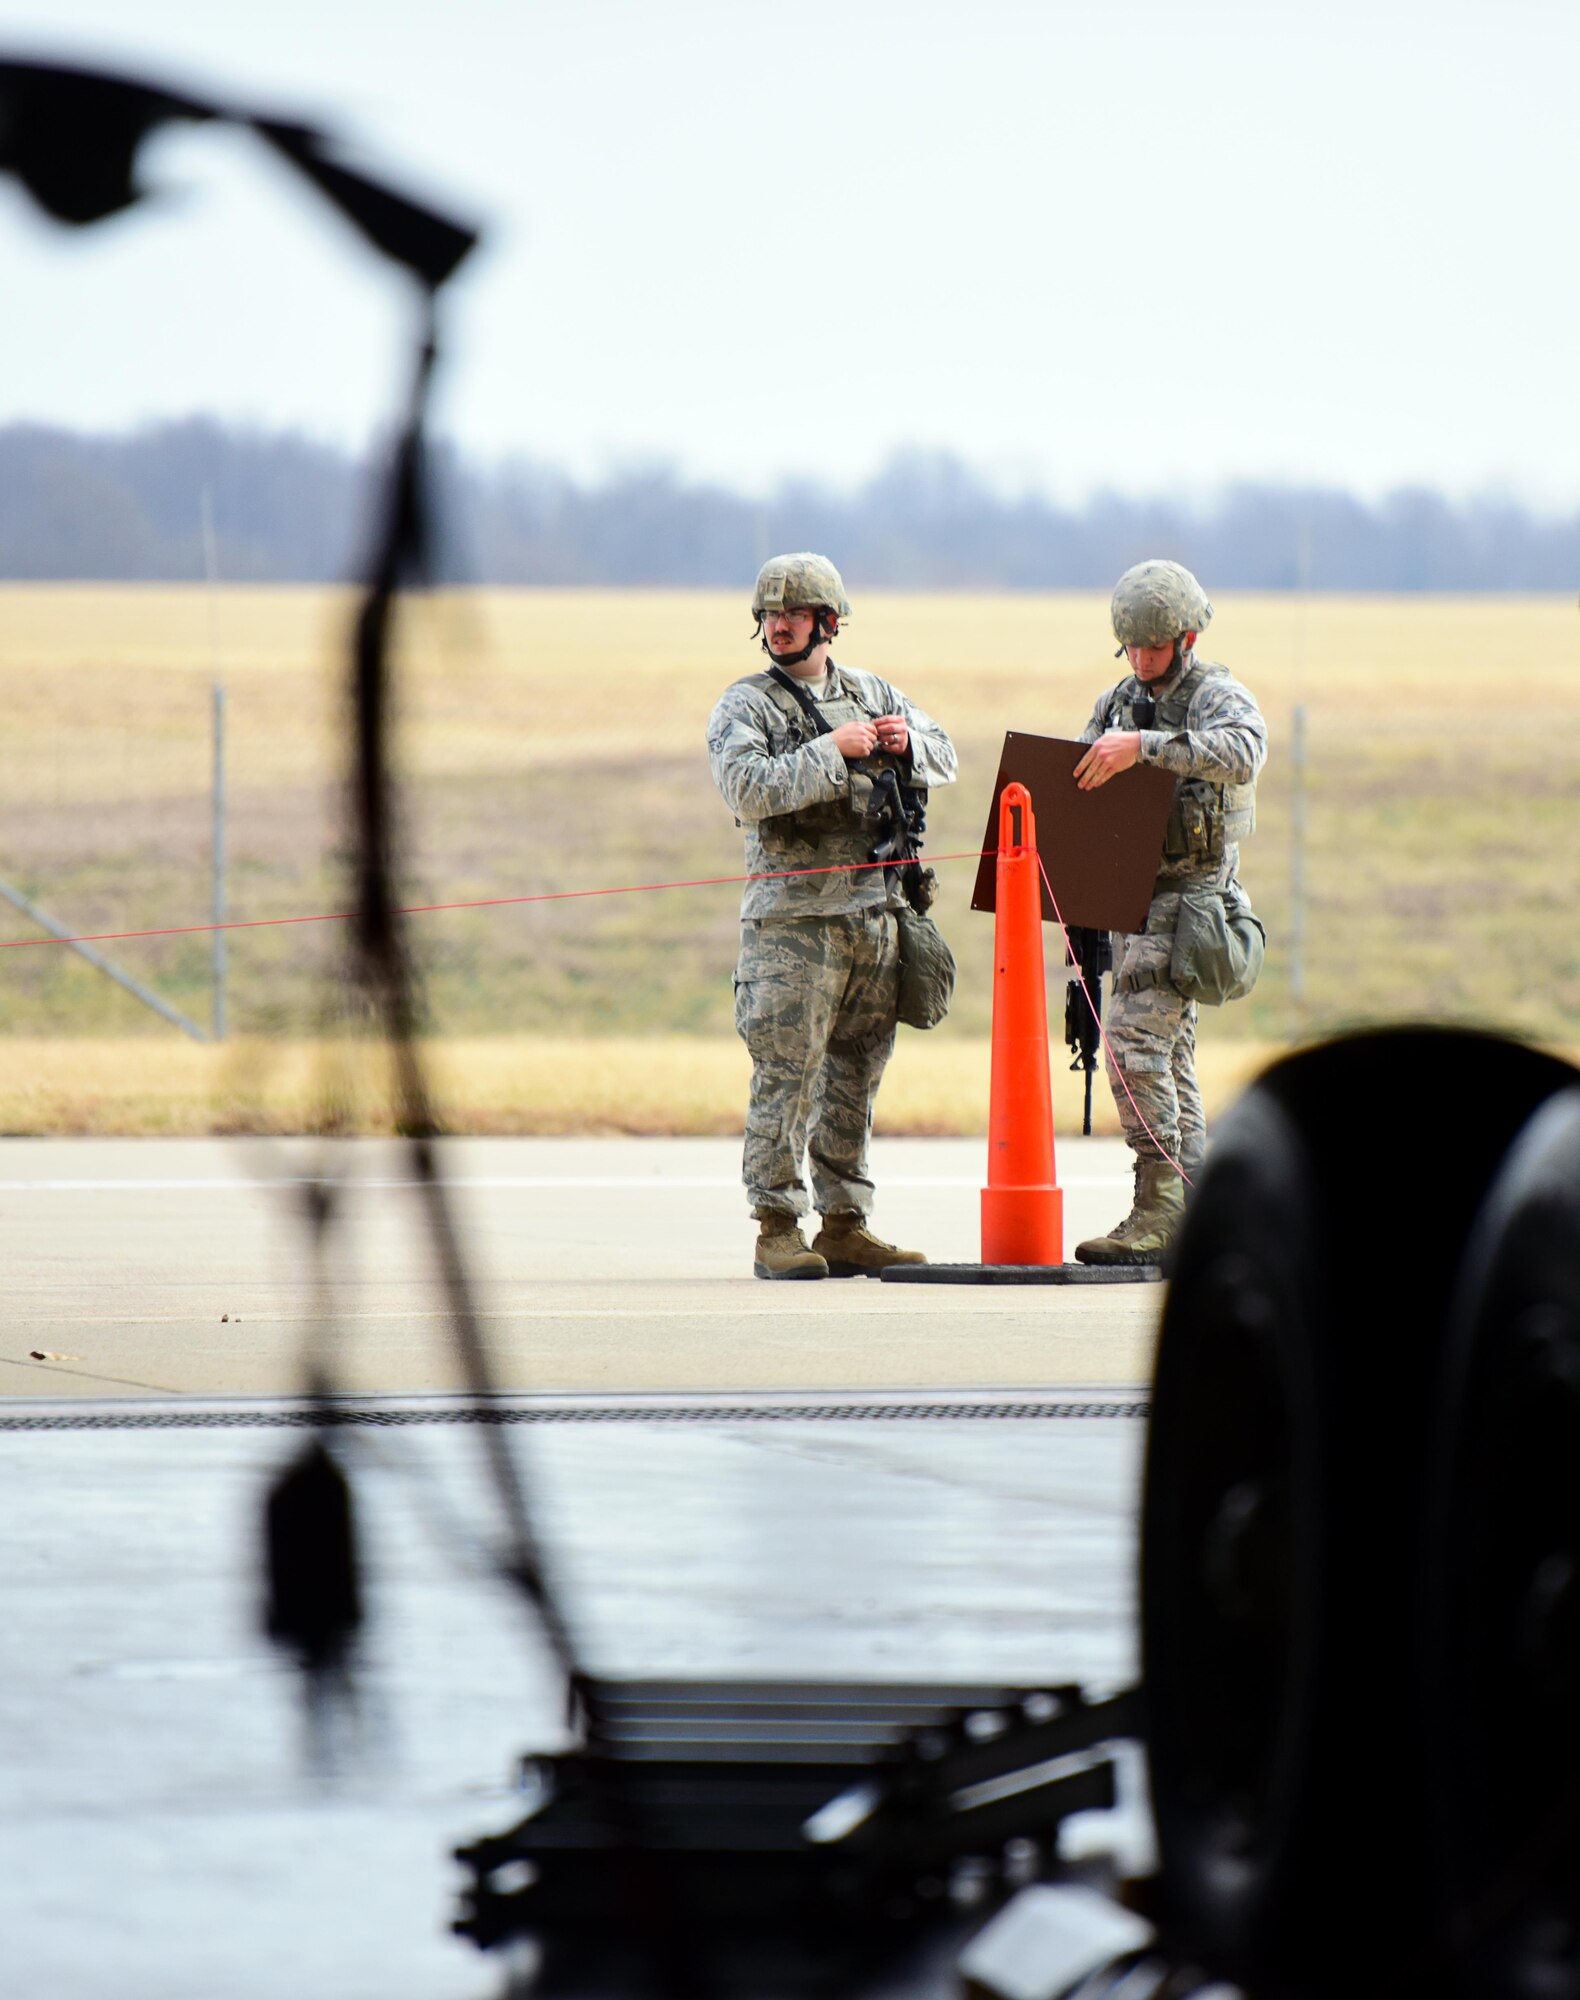 U.S. Air Force Airman 1st Class Eric Burns and Senior Airman Joseph Gaffney, both security response team members assigned to the 509th Security Forces Squadron (SFS), extend the exclusion area to ensure proper safety of resources at Whiteman Air Force Base, Mo., Feb. 28, 2017, in support of a no-notice operational readiness exercise. During the exercise, SFS Airmen validated Whiteman’s force protection procedures.